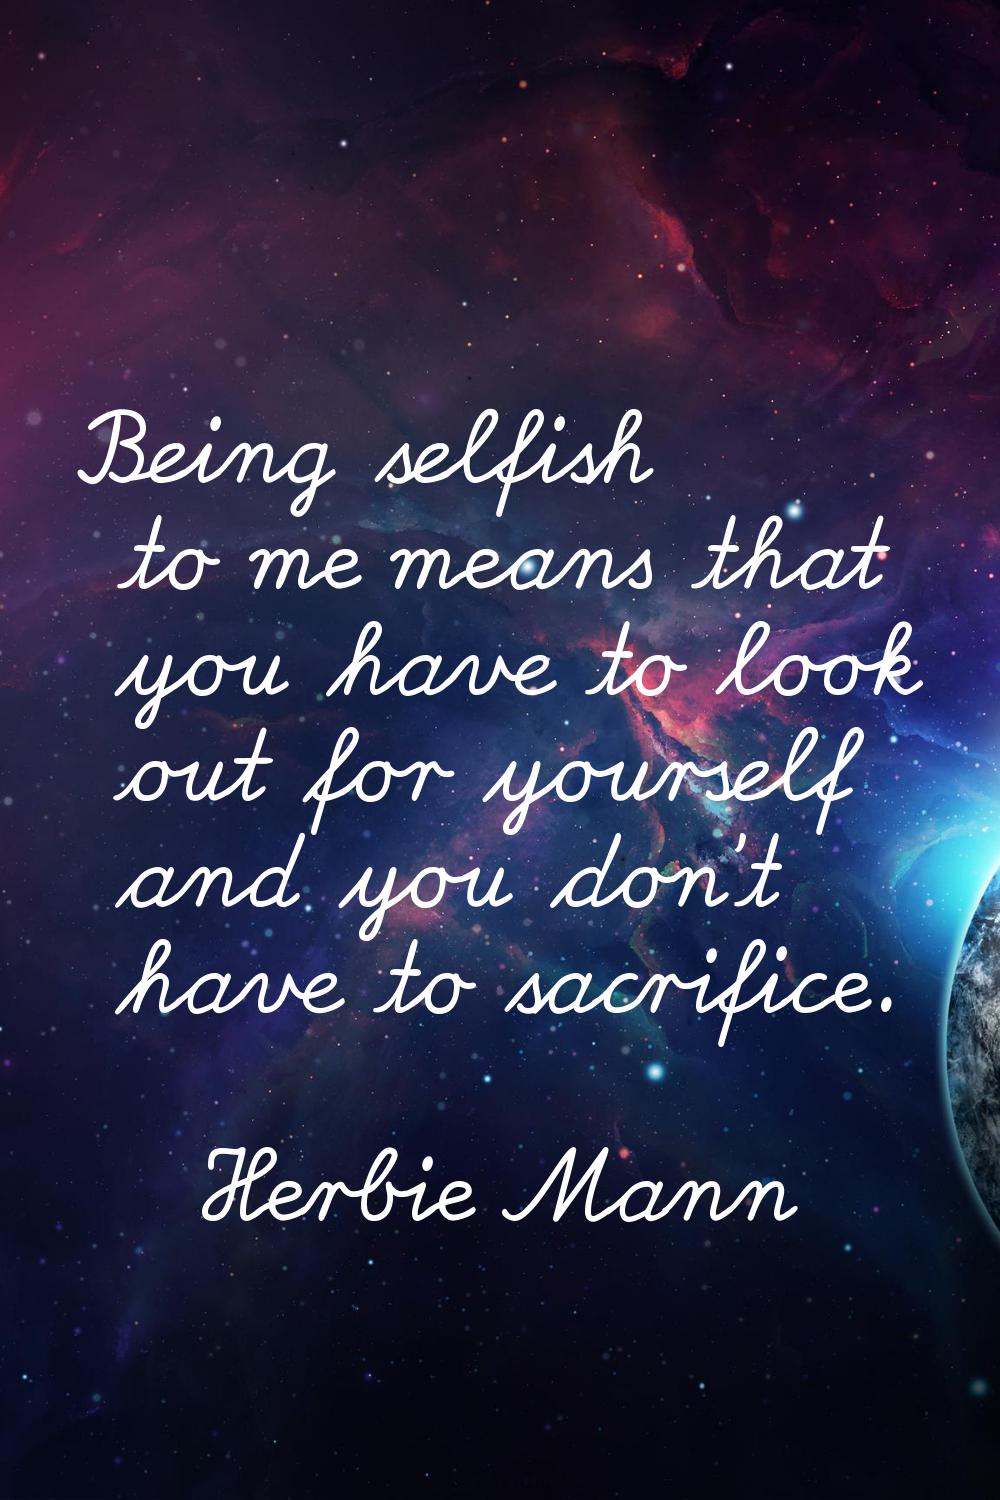 Being selfish to me means that you have to look out for yourself and you don't have to sacrifice.